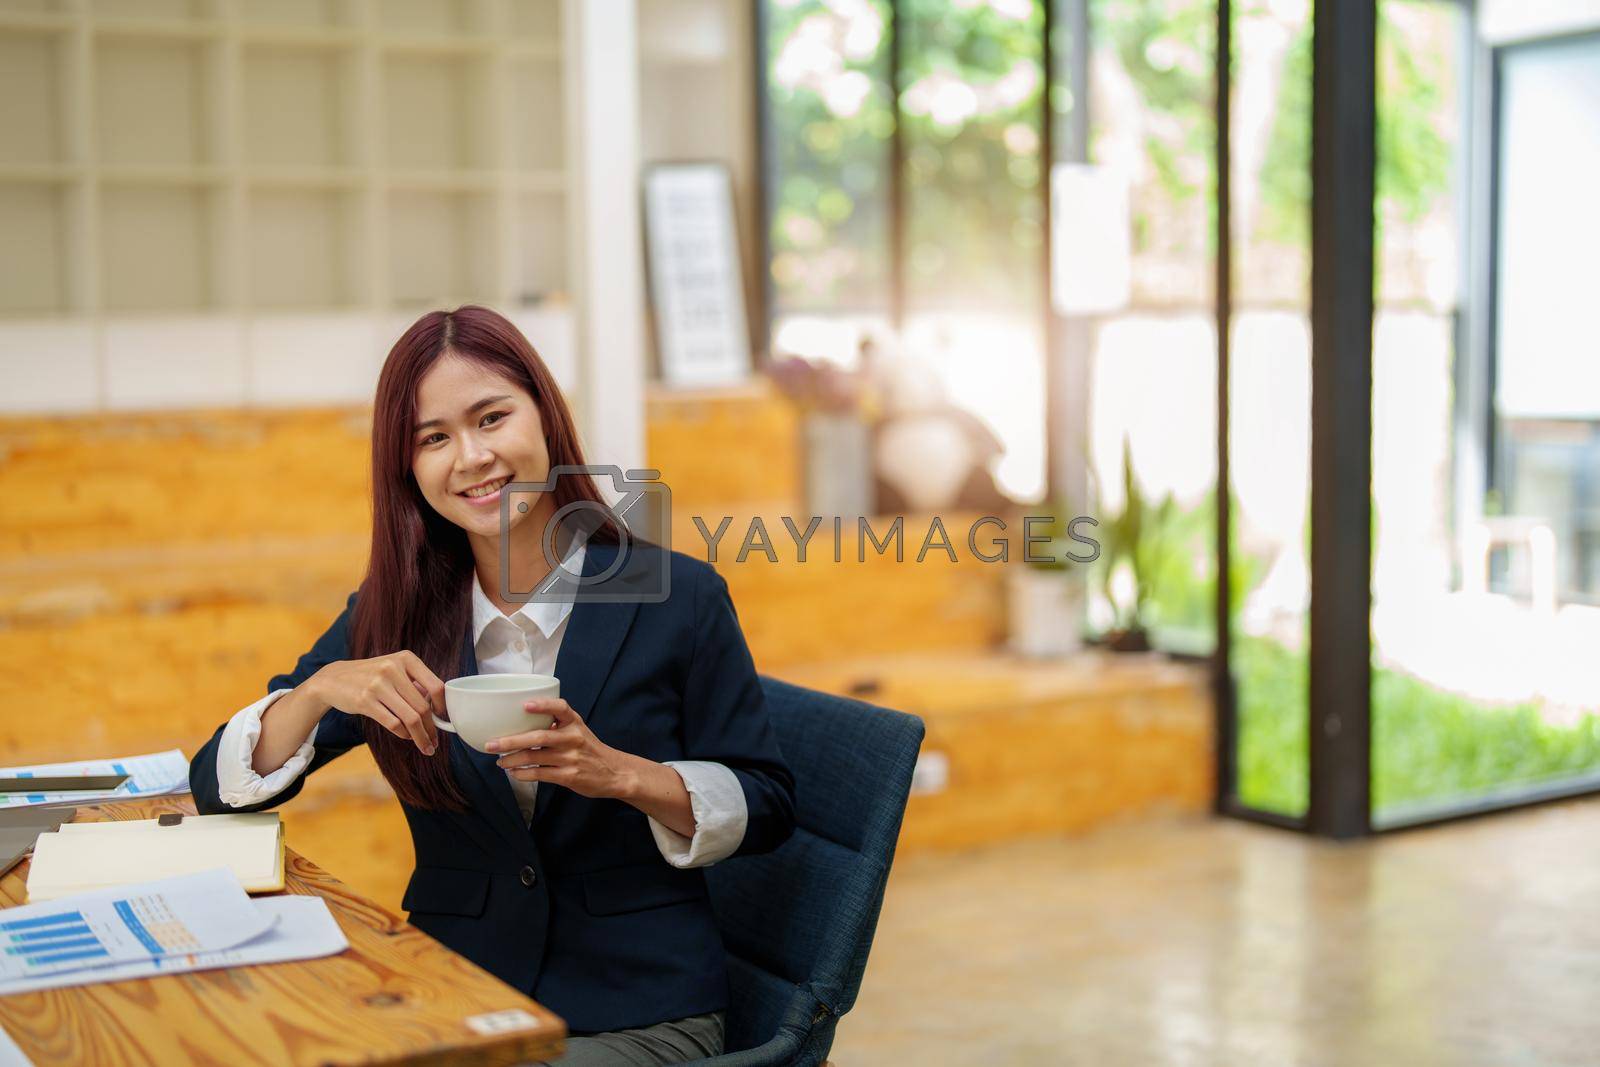 Royalty free image of Asian female worker using computer and budget documents on desk by Manastrong